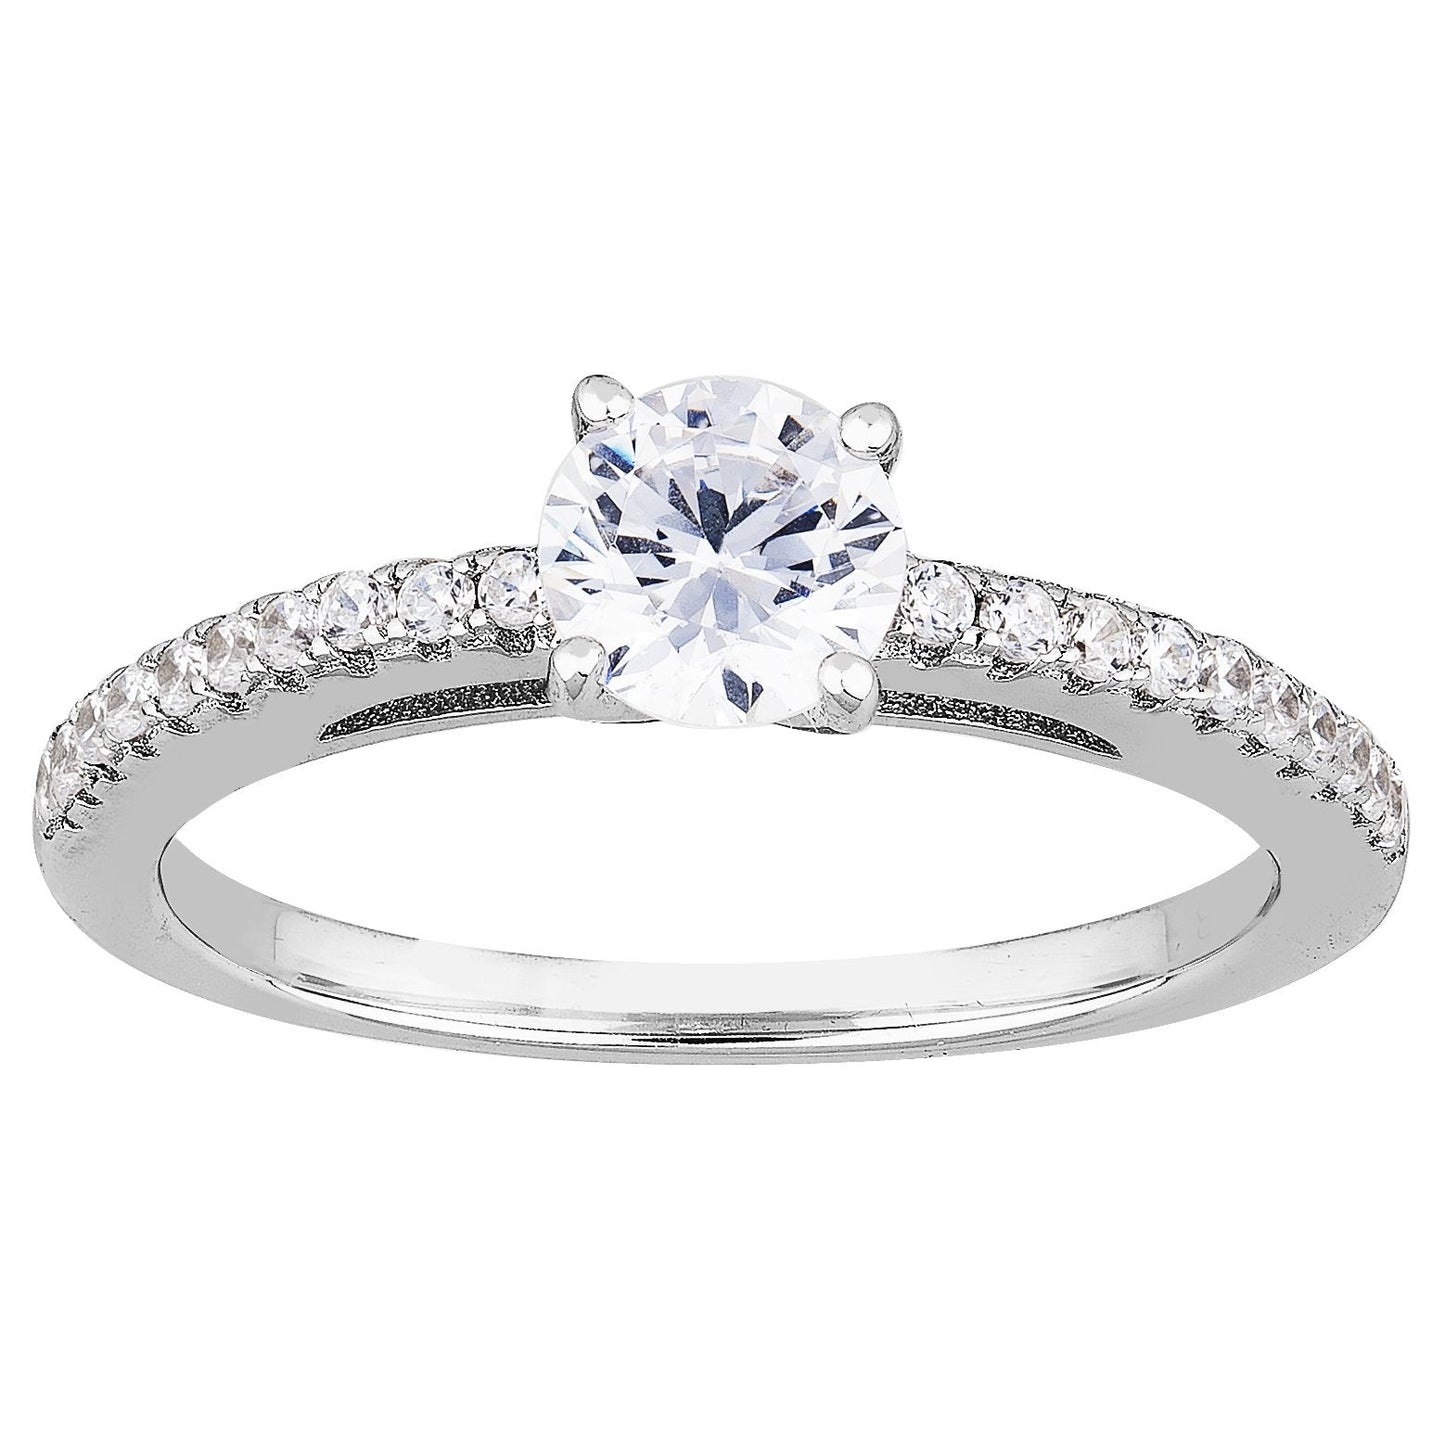 0.60ct Diamond Eternity with Center Stone Ring in 18ct White Gold